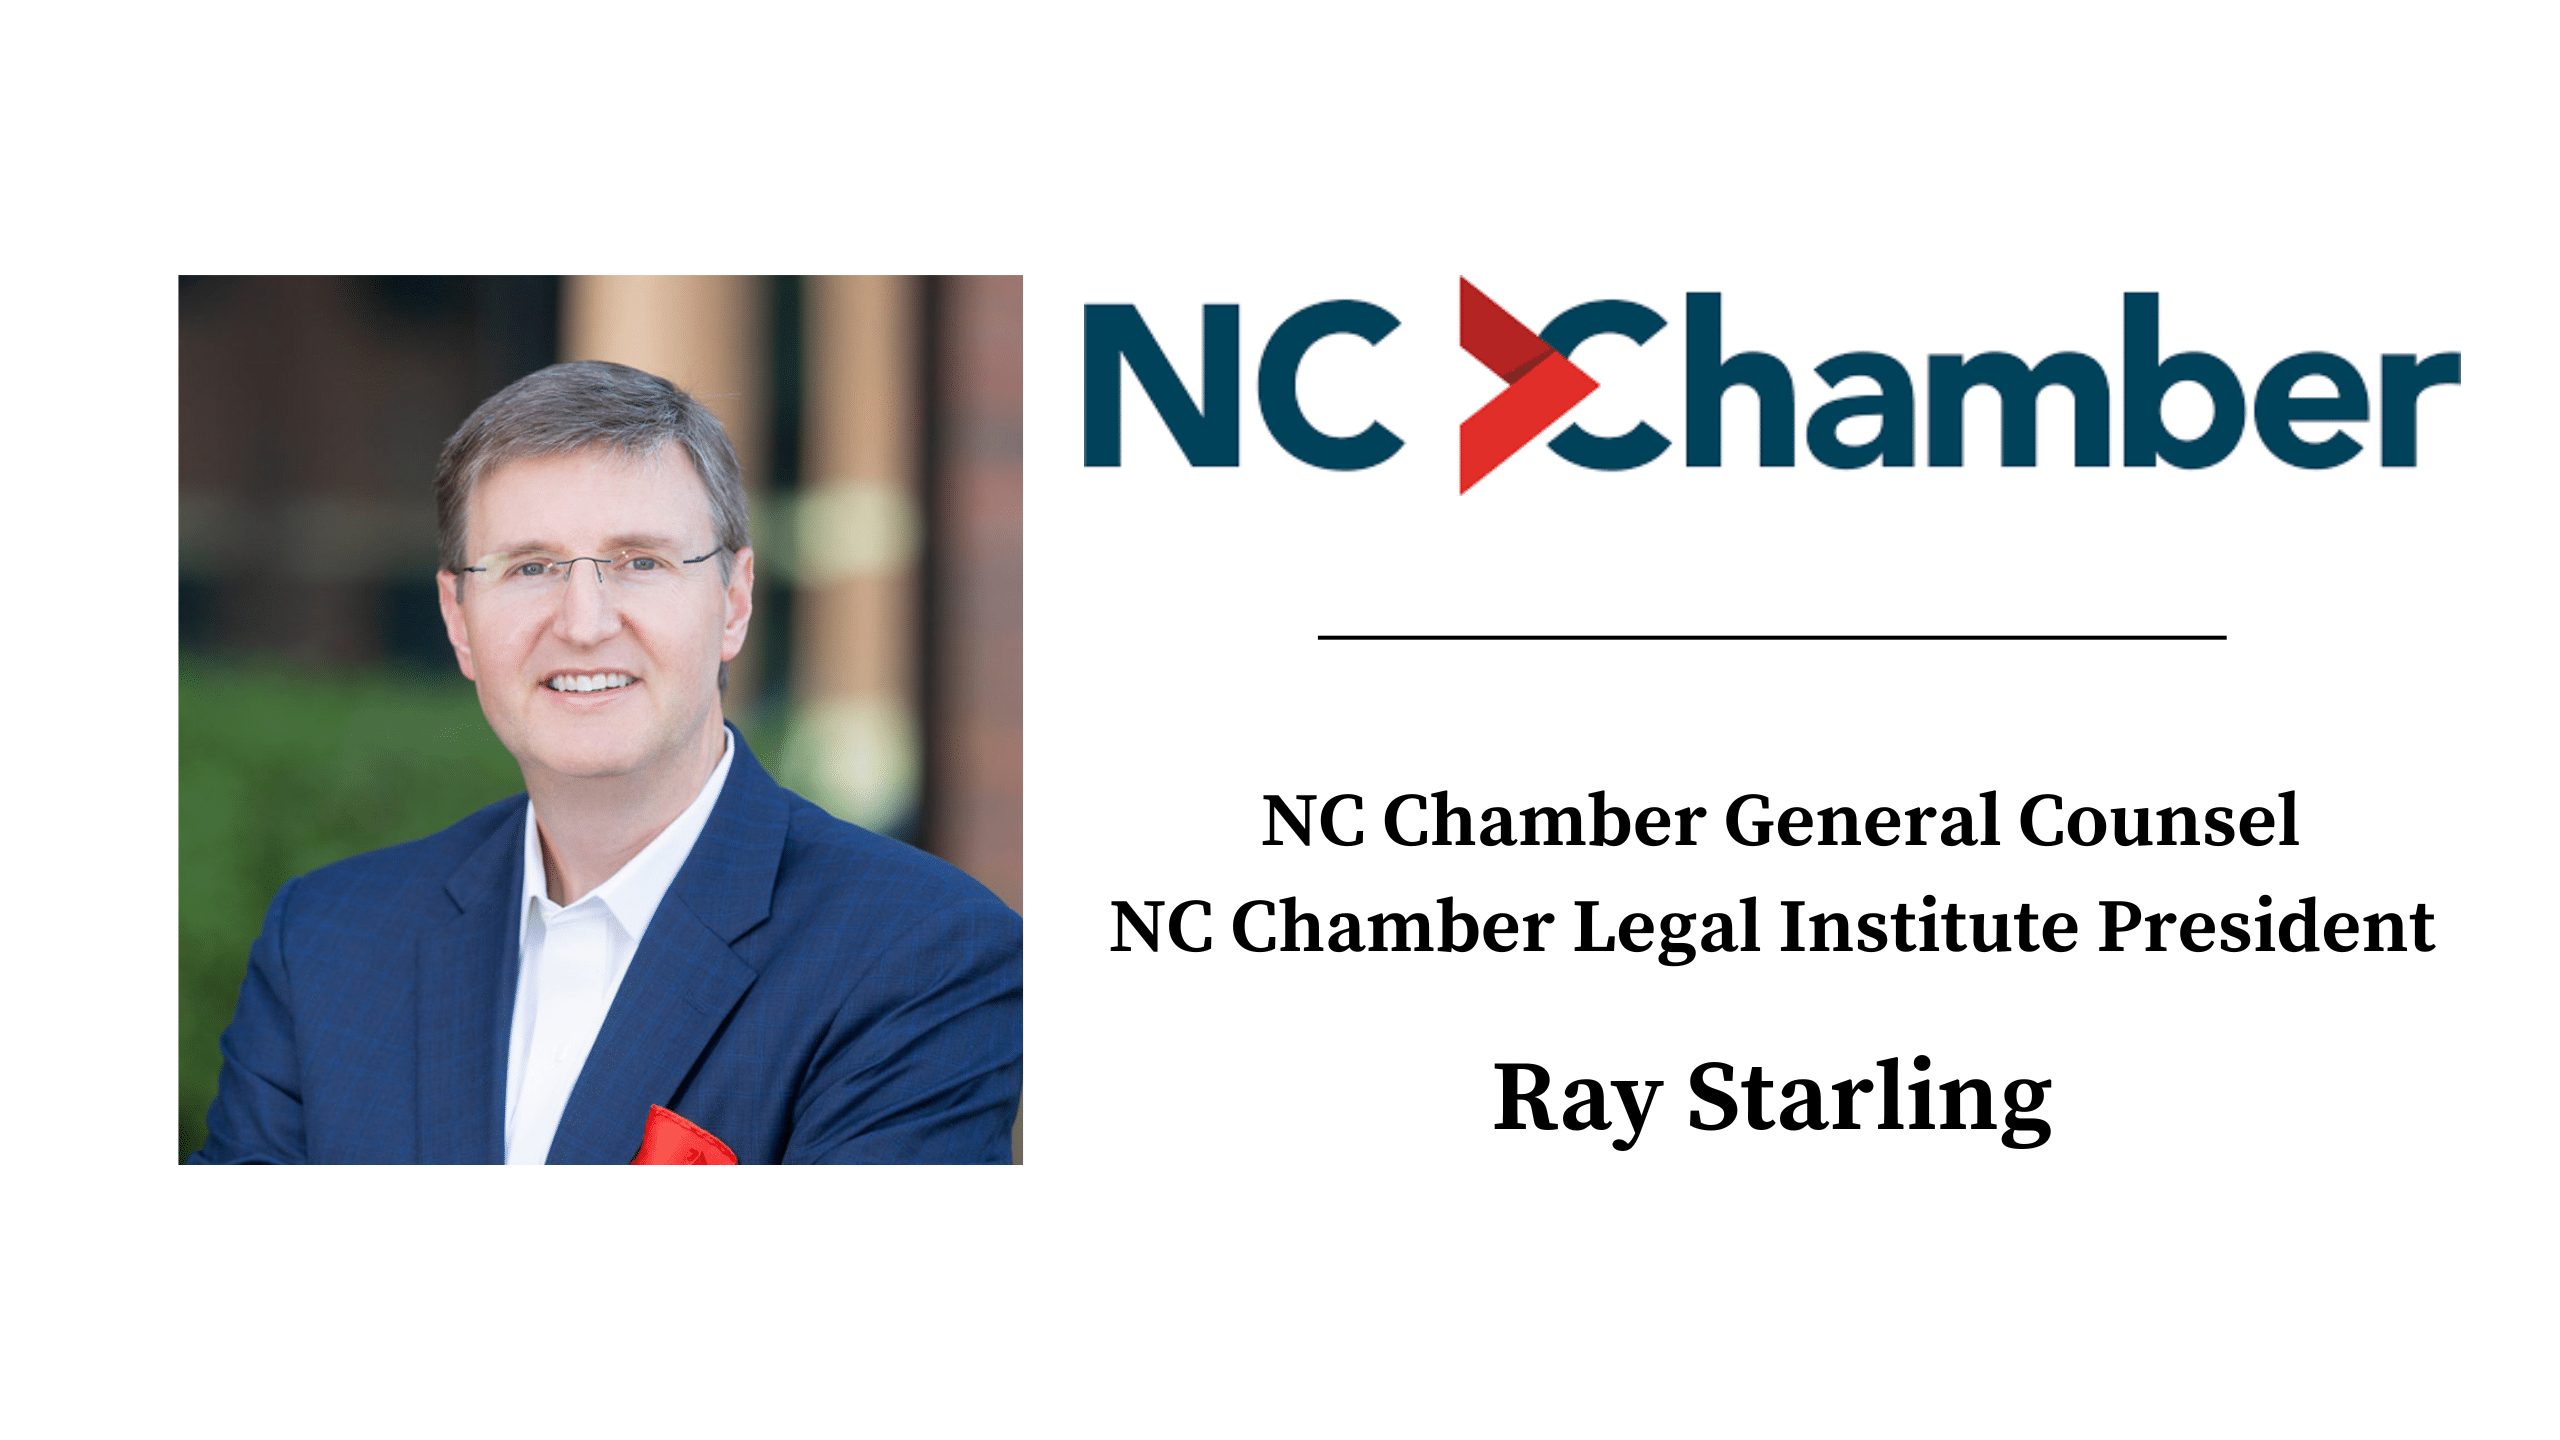 Critical Conversations with Scott T. Hamilton featuring Ray Starling, General Counsel & President of the NC Chamber Legal Institute